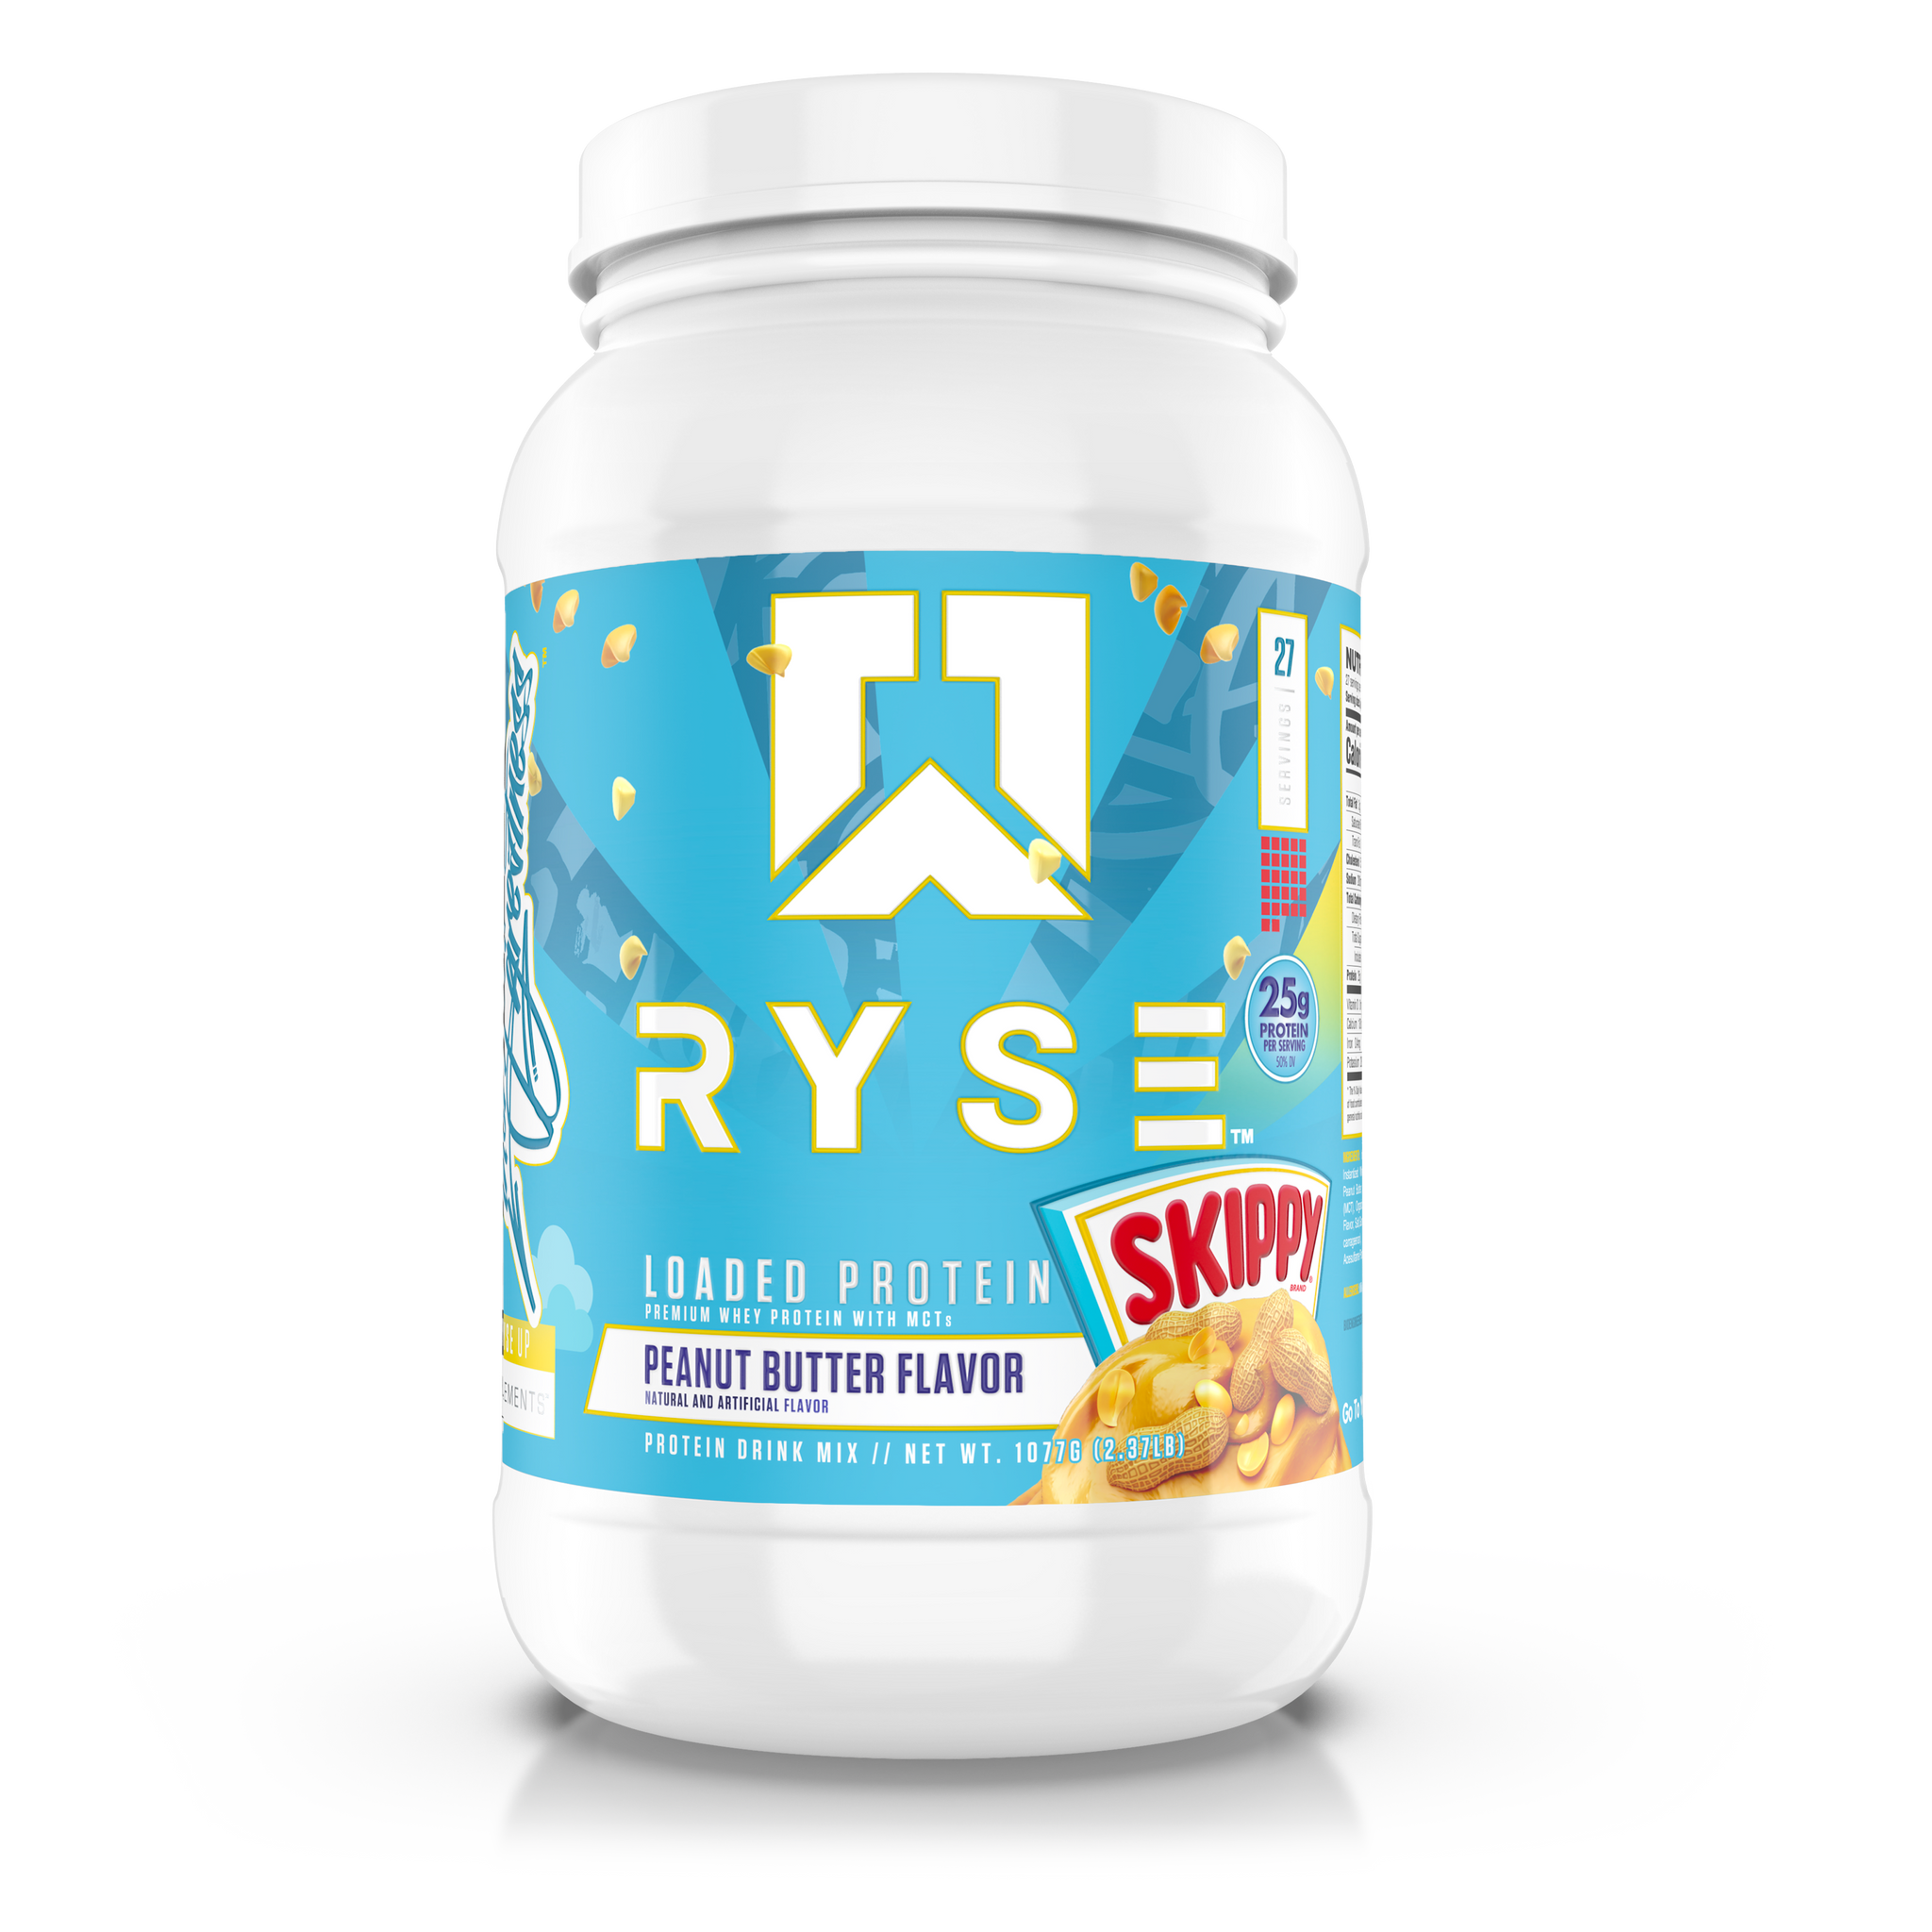 Ryse SKIPPY® PEANUT BUTTER FLAVOR LOADED PROTEIN 2LBS